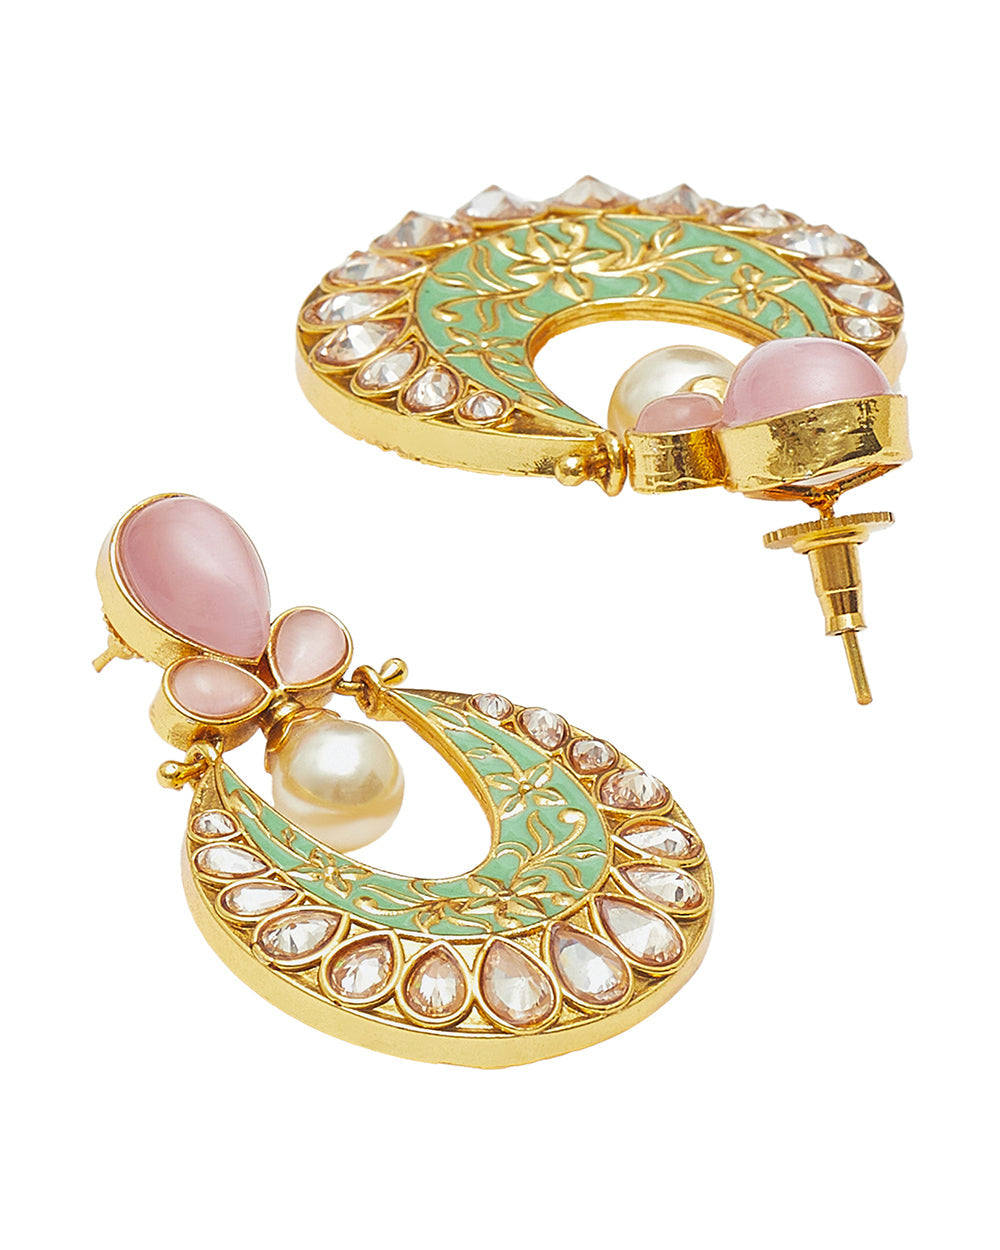 Women's Gold Finish Earrings With Pearl Dangle - Voylla